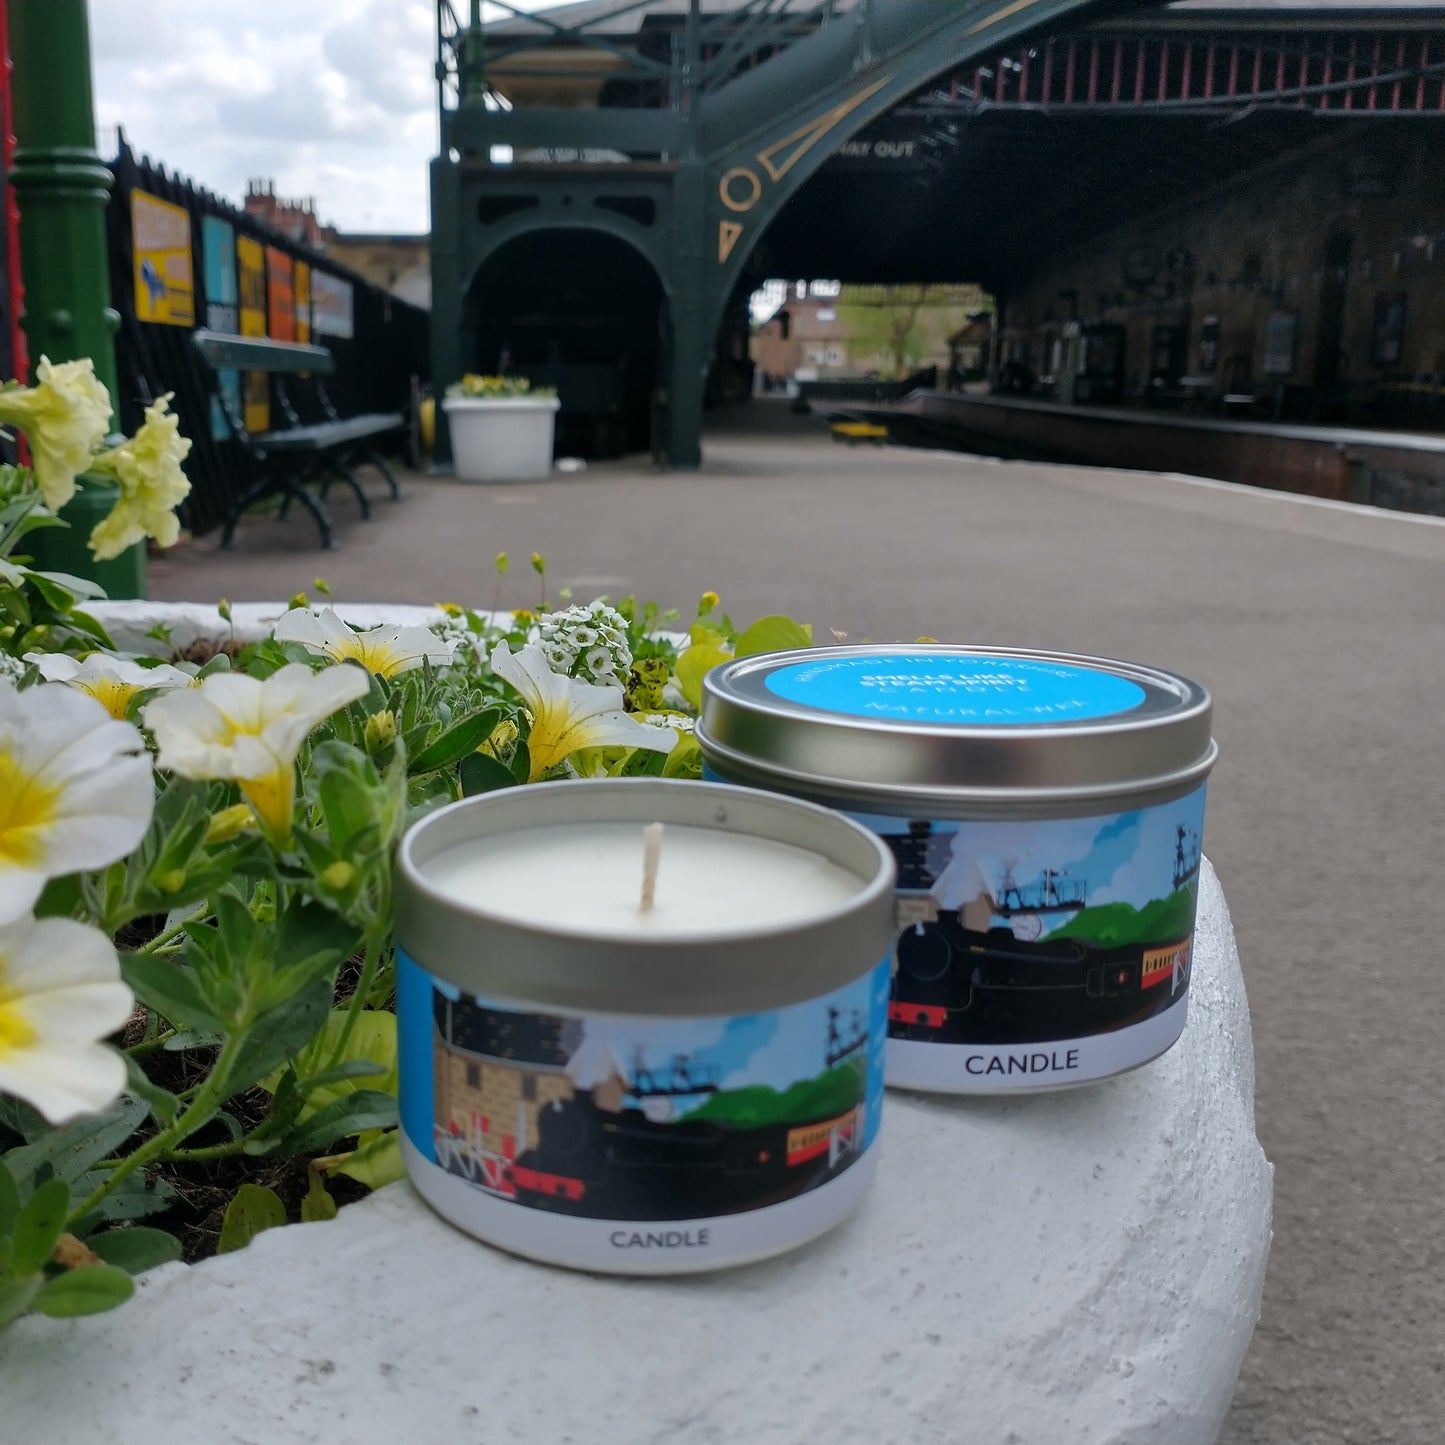 Two candles in tins posing on a station platform.